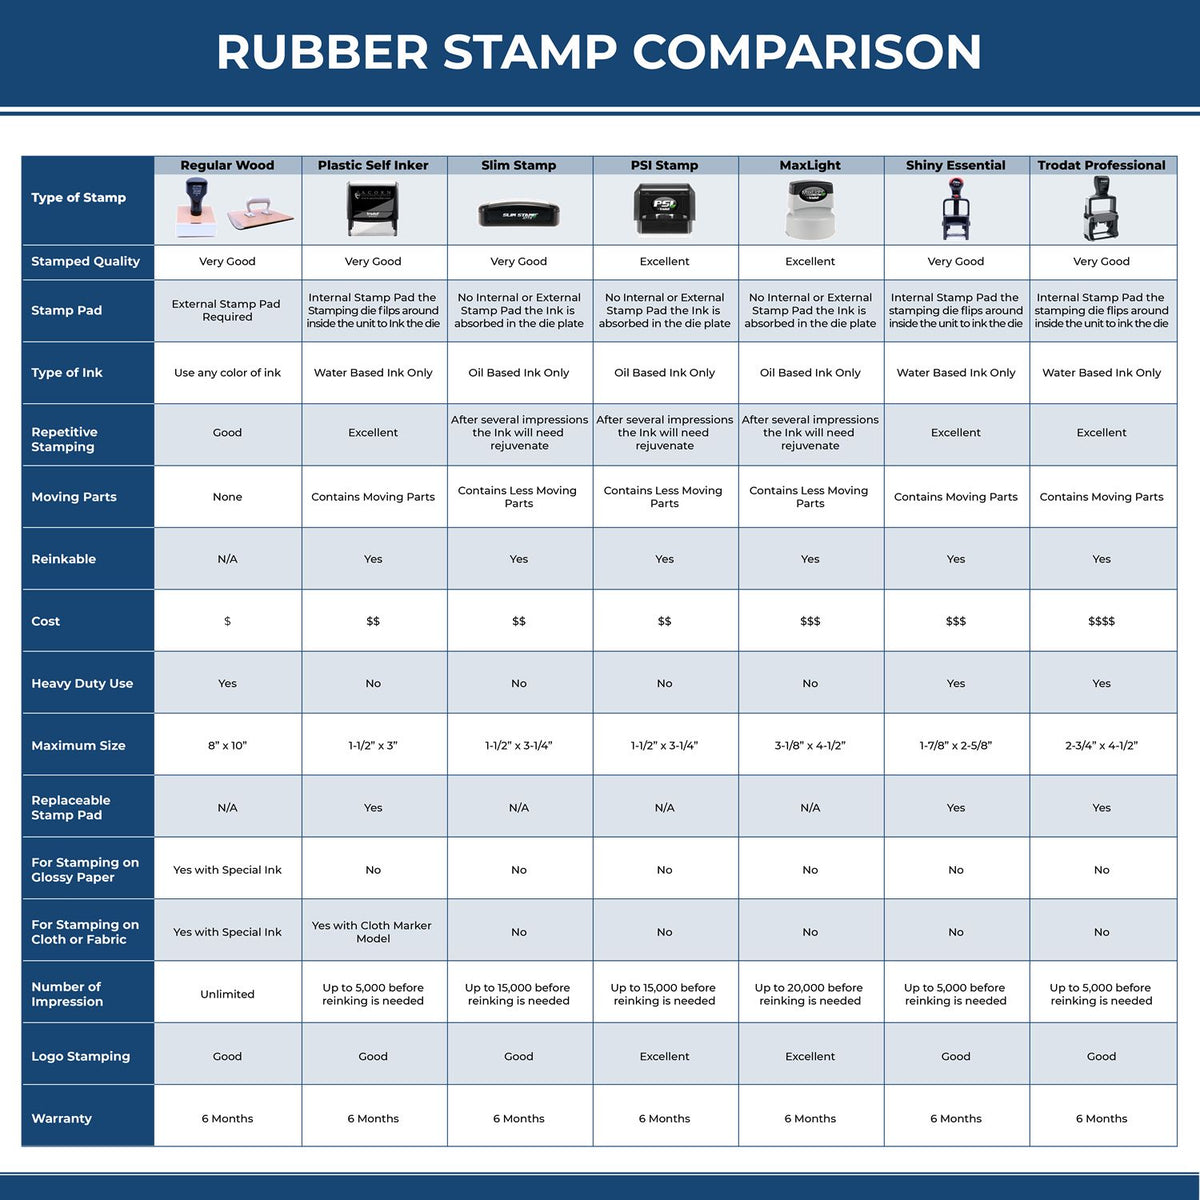 Large Self Inking Validated Stamp 4582S Rubber Stamp Comparison